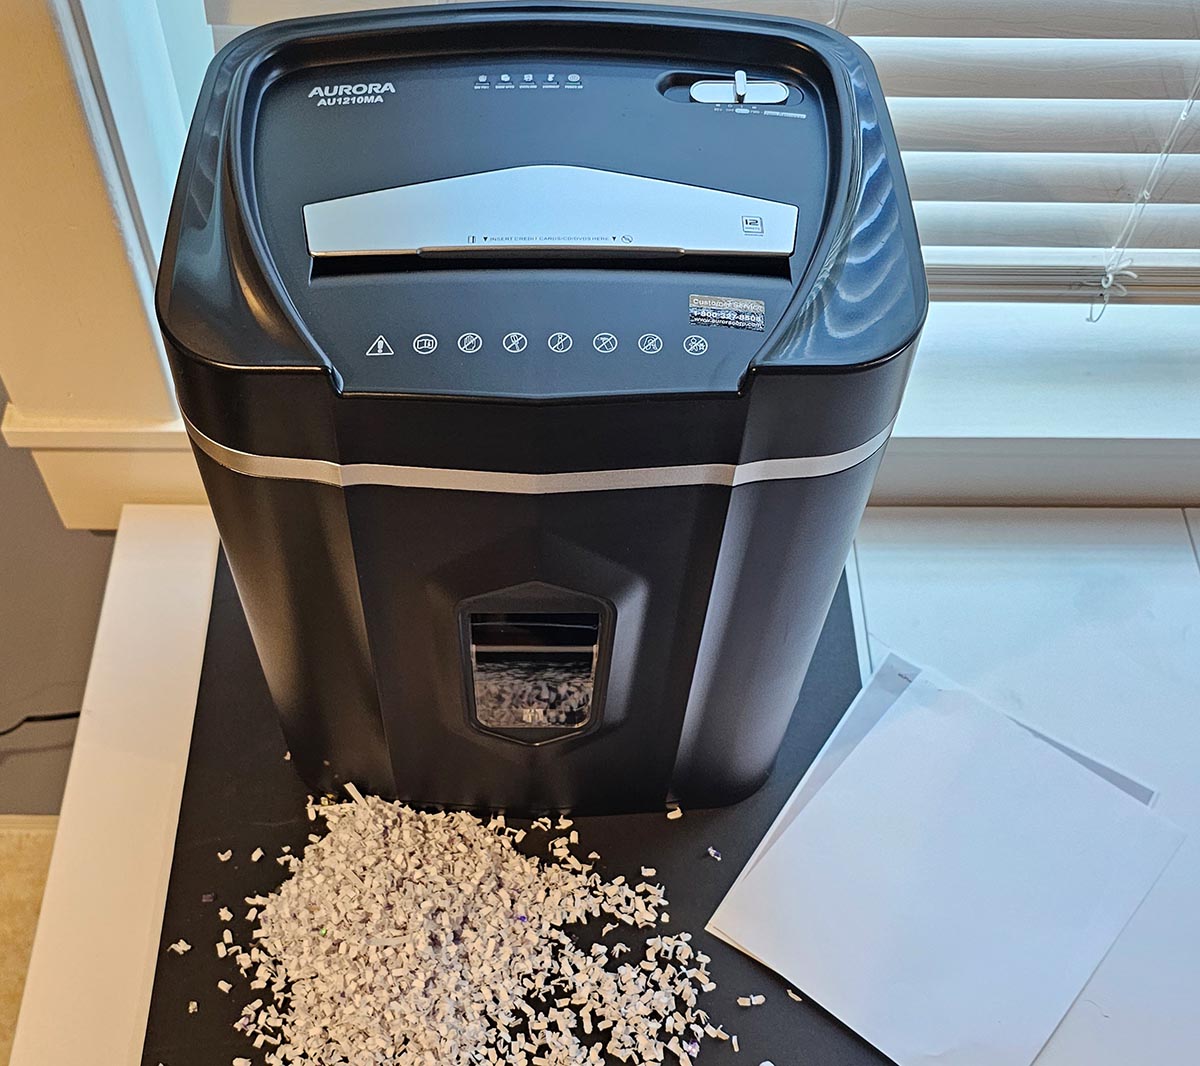 The best paper shredder option next to a stack of paper and a pile of paper that's been shredded